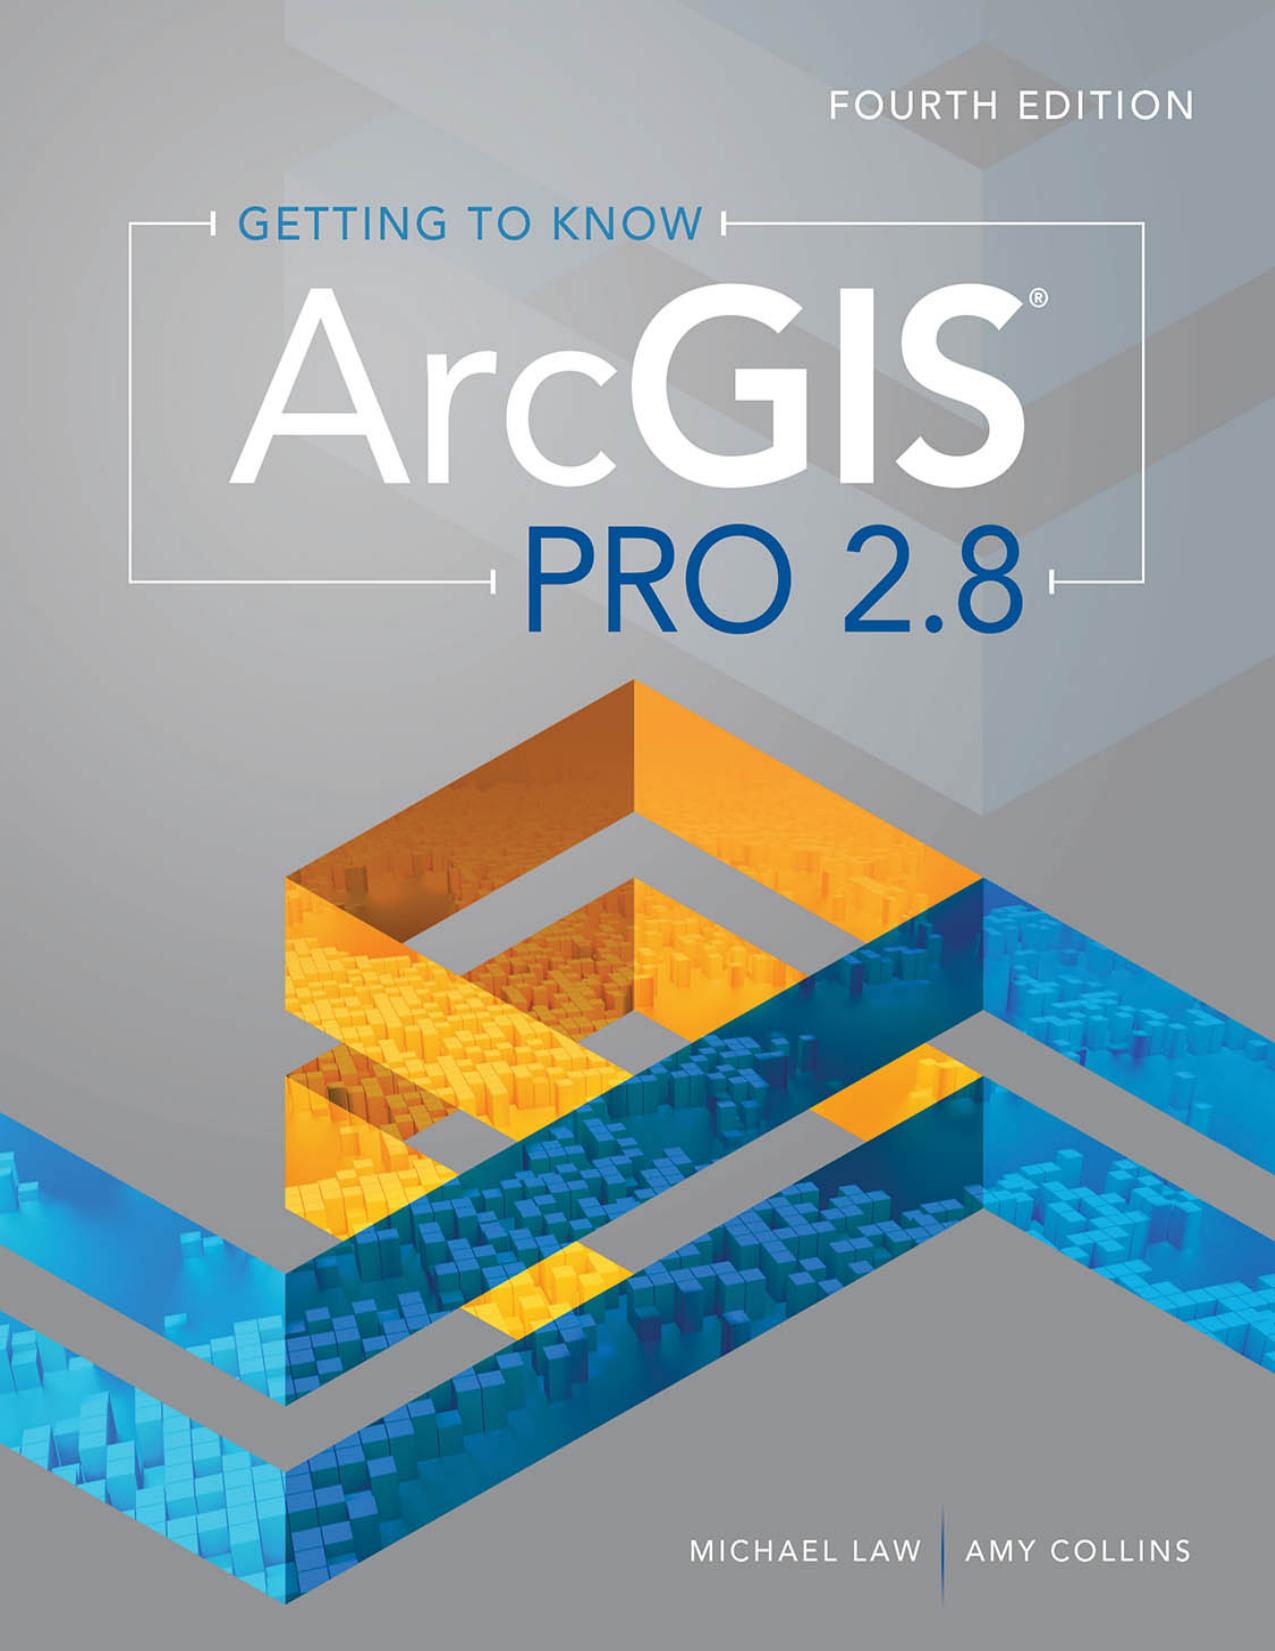 Getting to Know ArcGIS Pro 2.8 4th Edition by Michael Law , Amy Collins